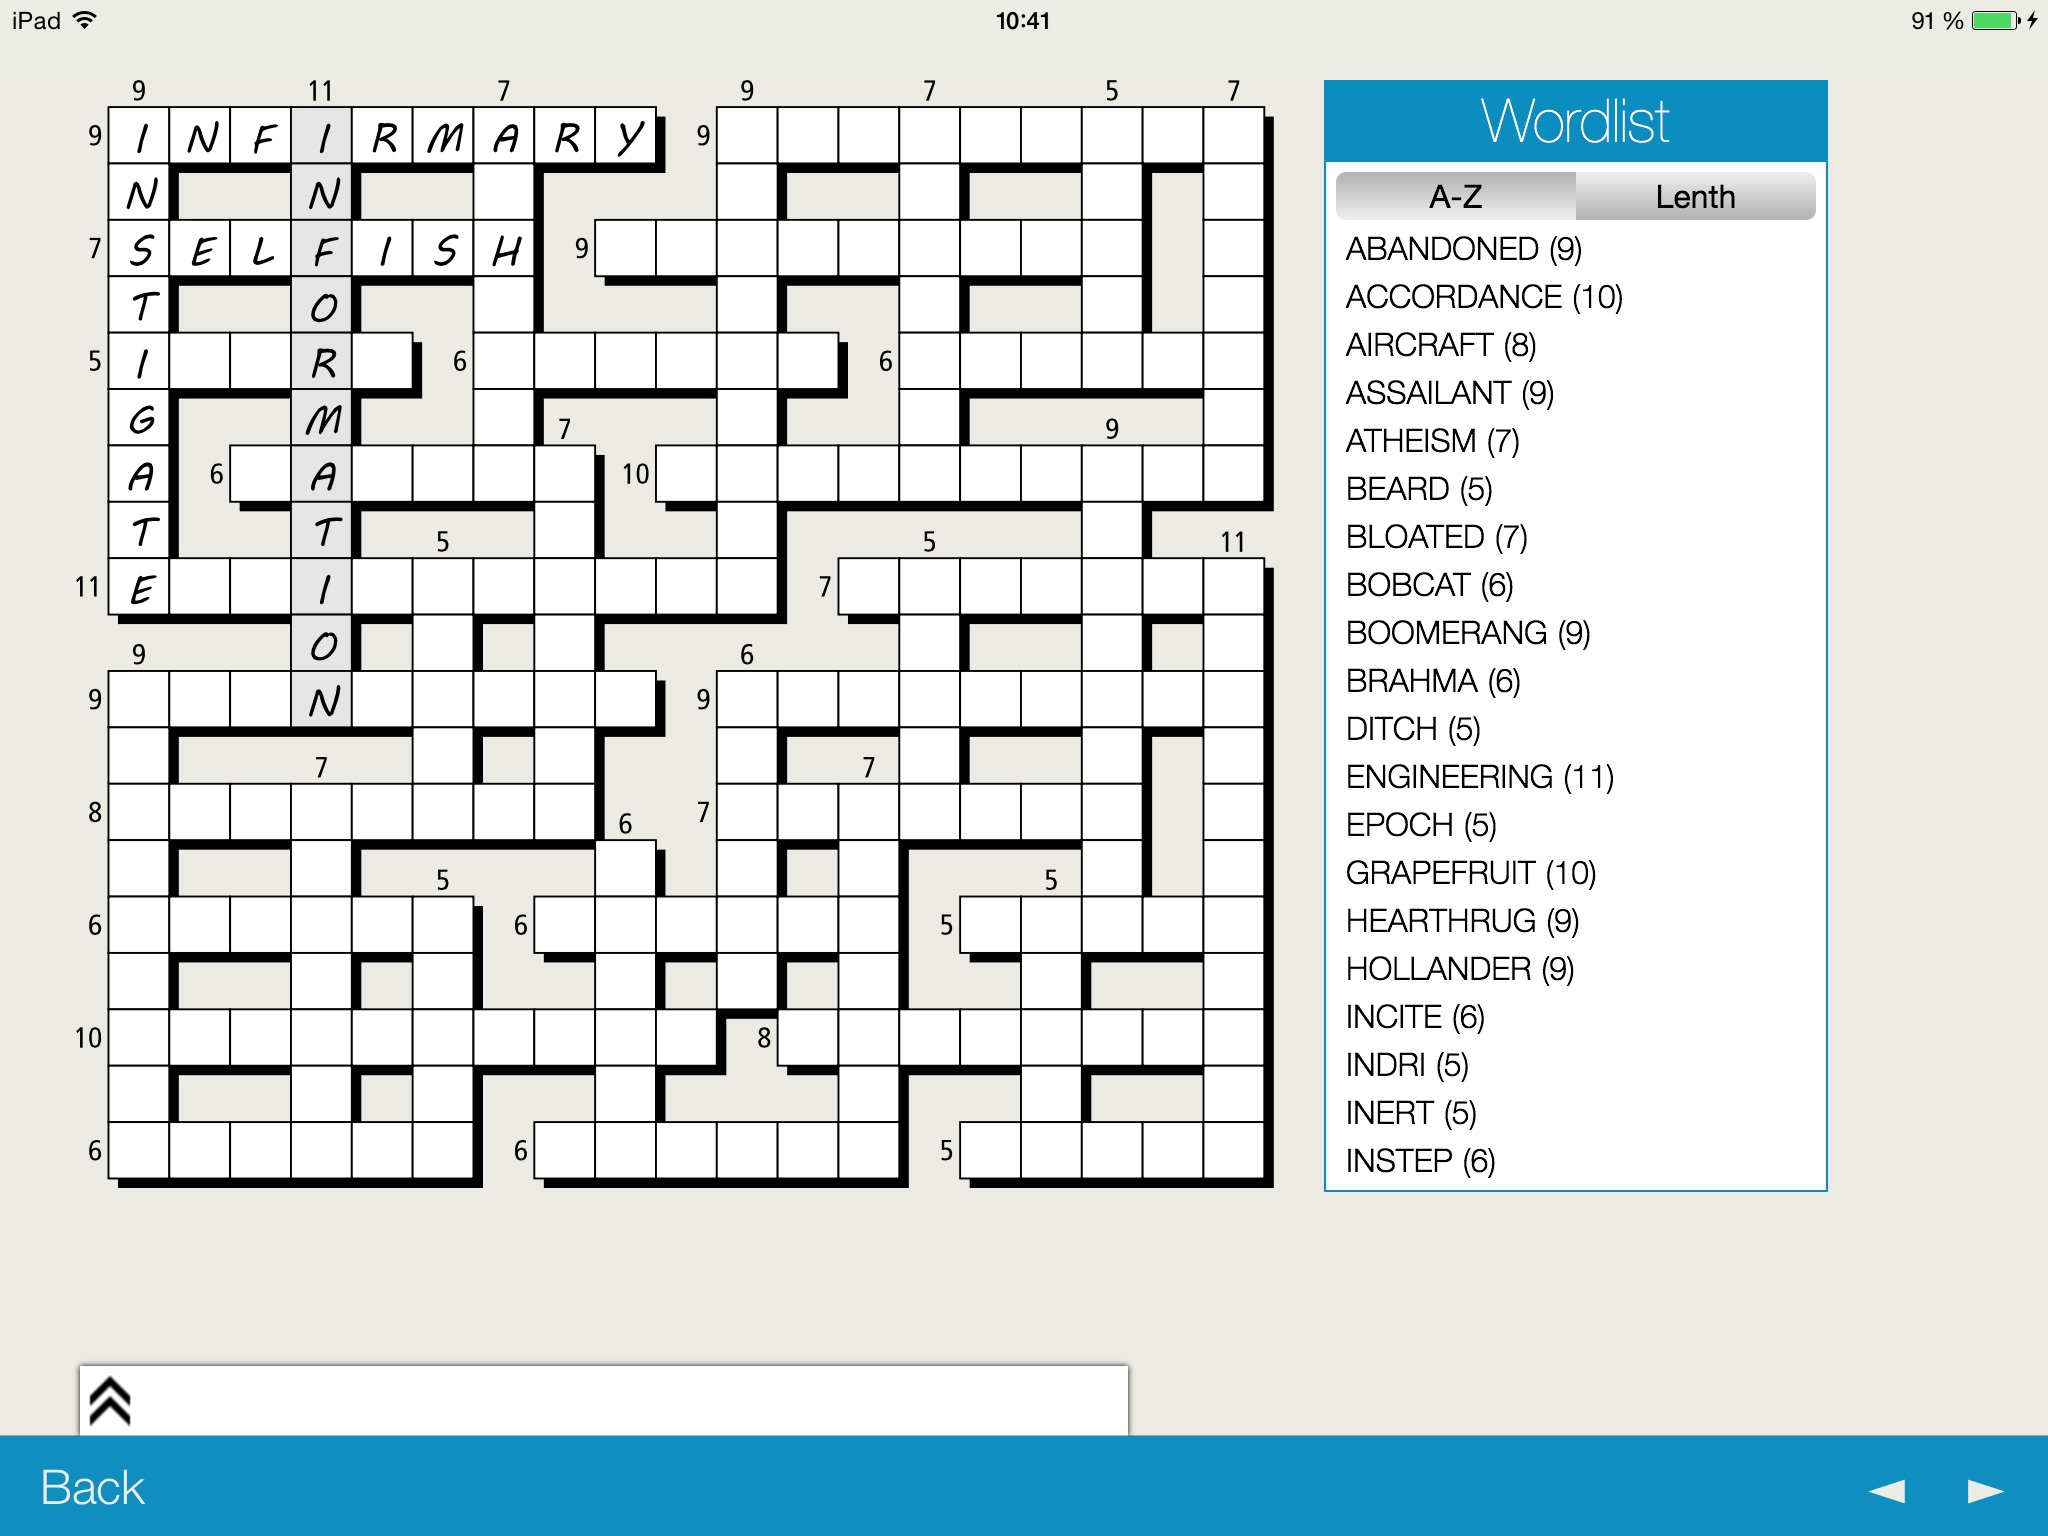 iPuzzleHD 2 - Crosswords, Puzzles and Mind-Training Games screenshot 3